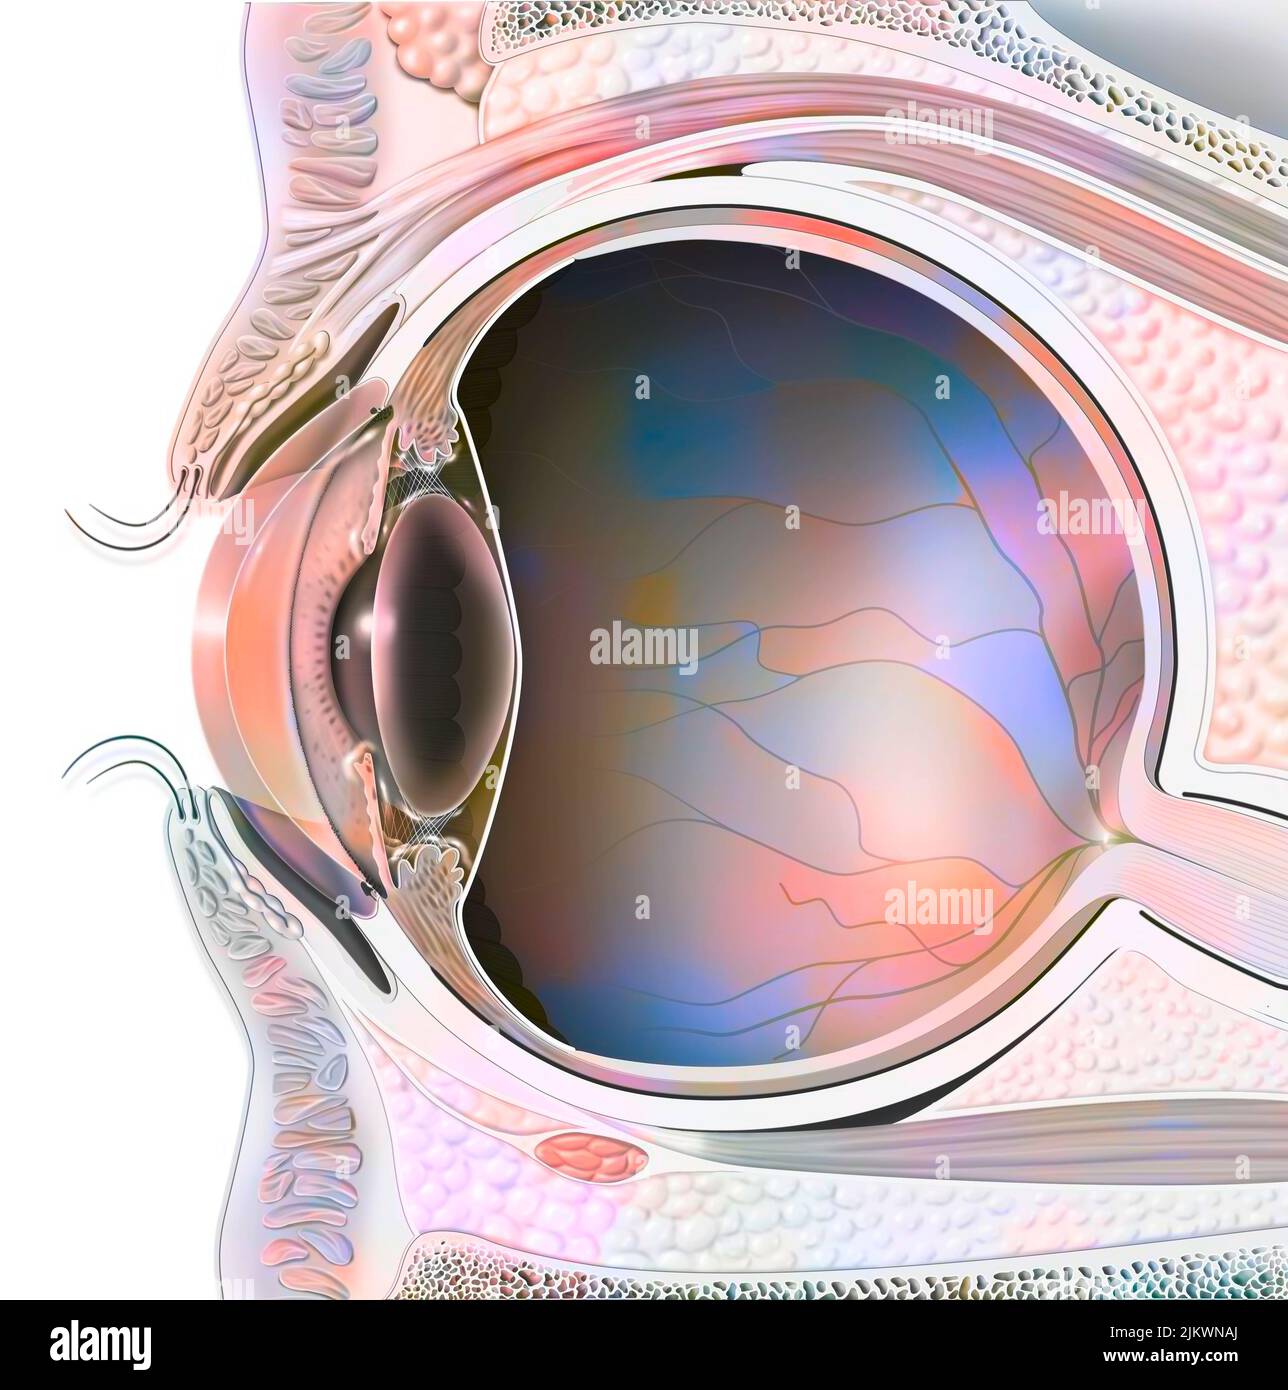 Anatomy of an eye in section showing lens, retina. Stock Photo